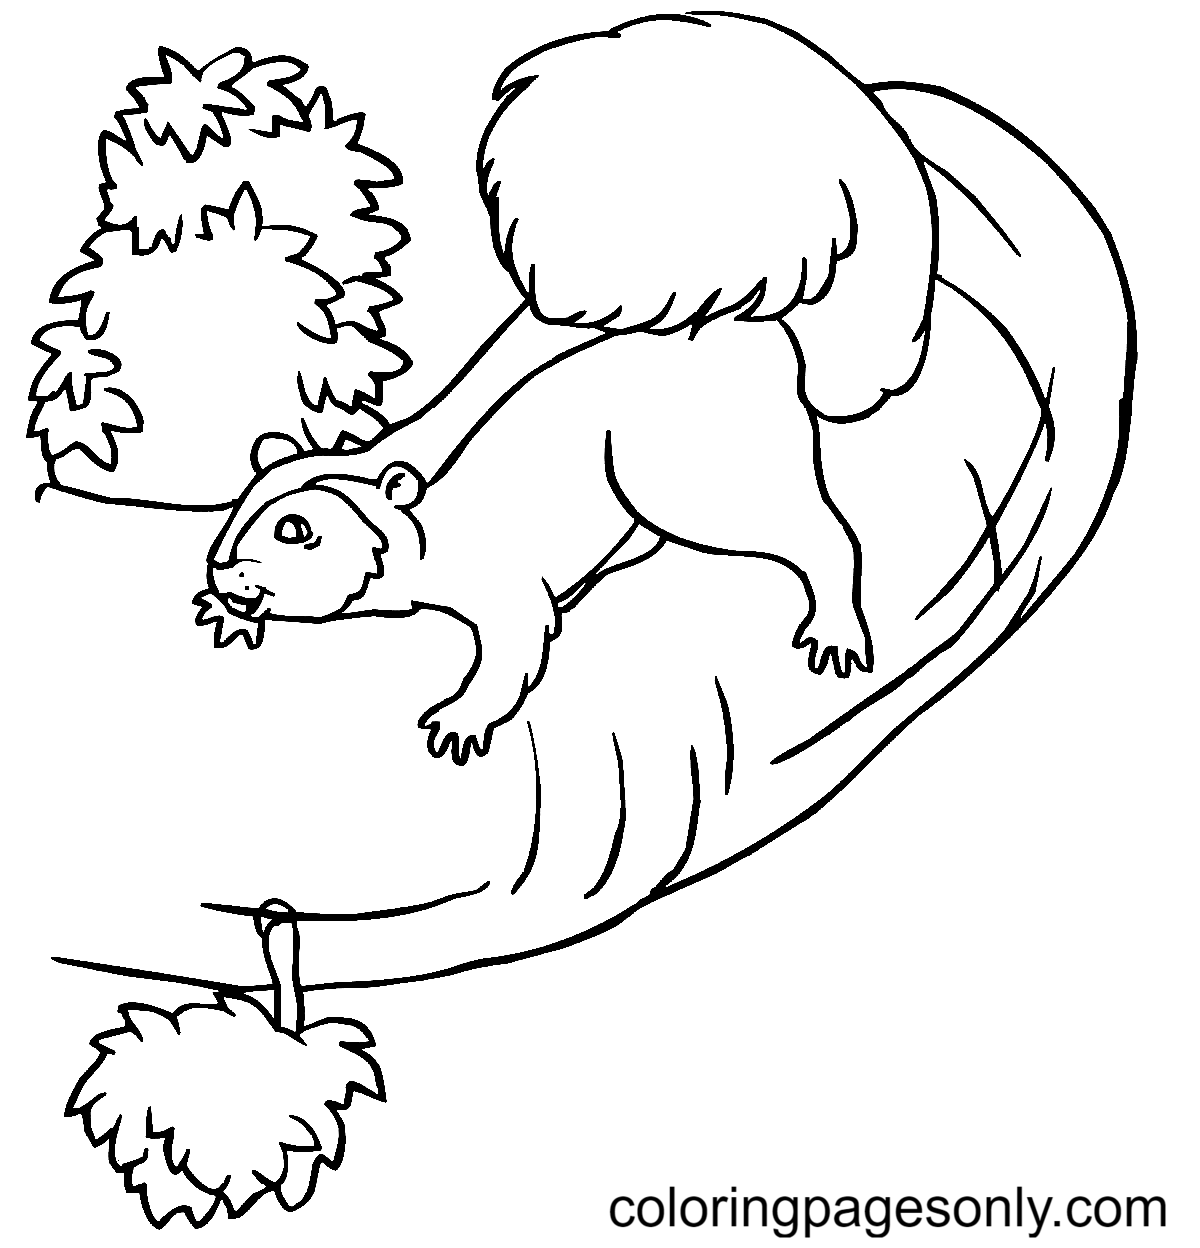 Squirrel on a Tree Coloring Pages